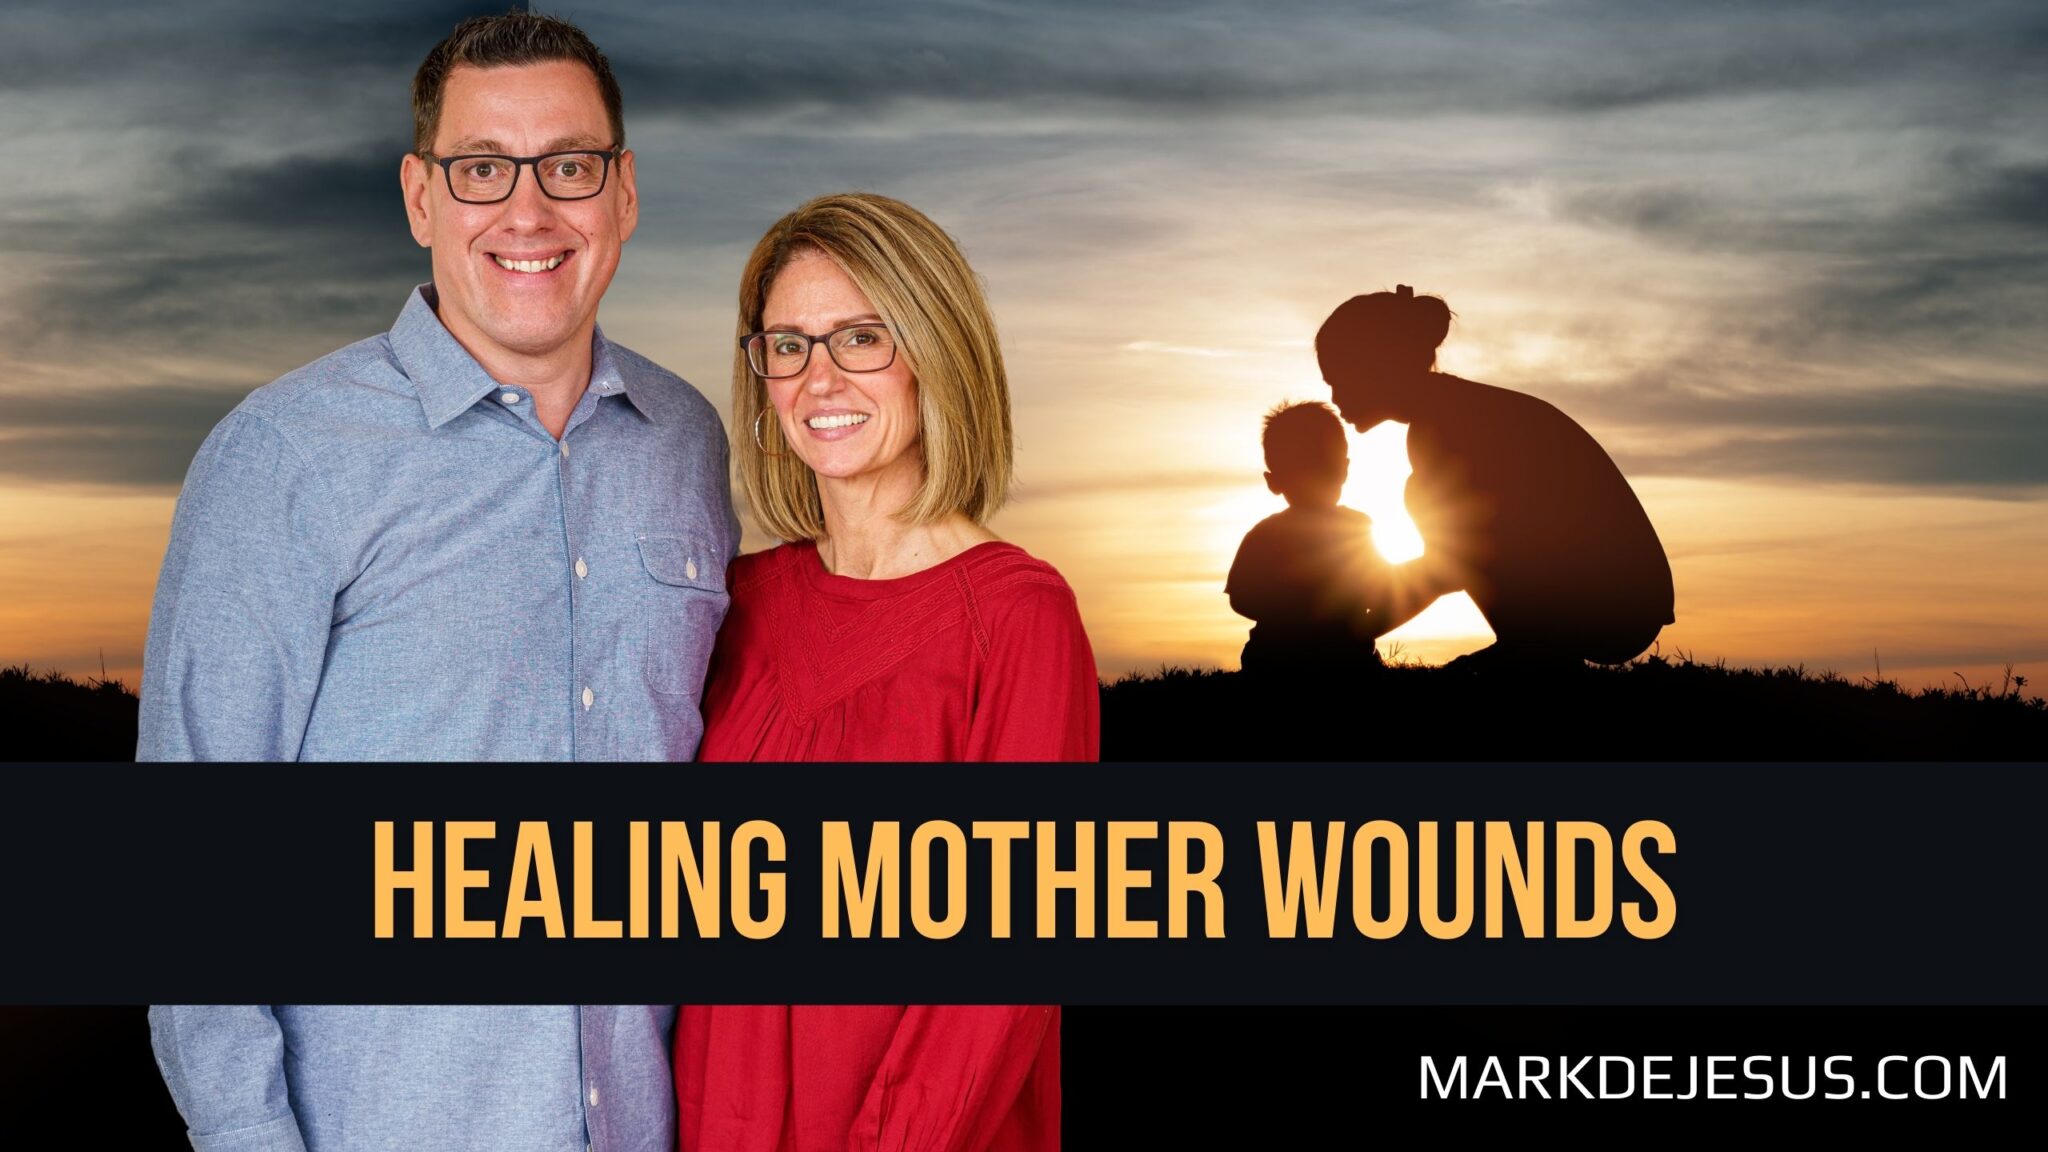 Recognizing Mother Wounds and Taking the Healing Journey